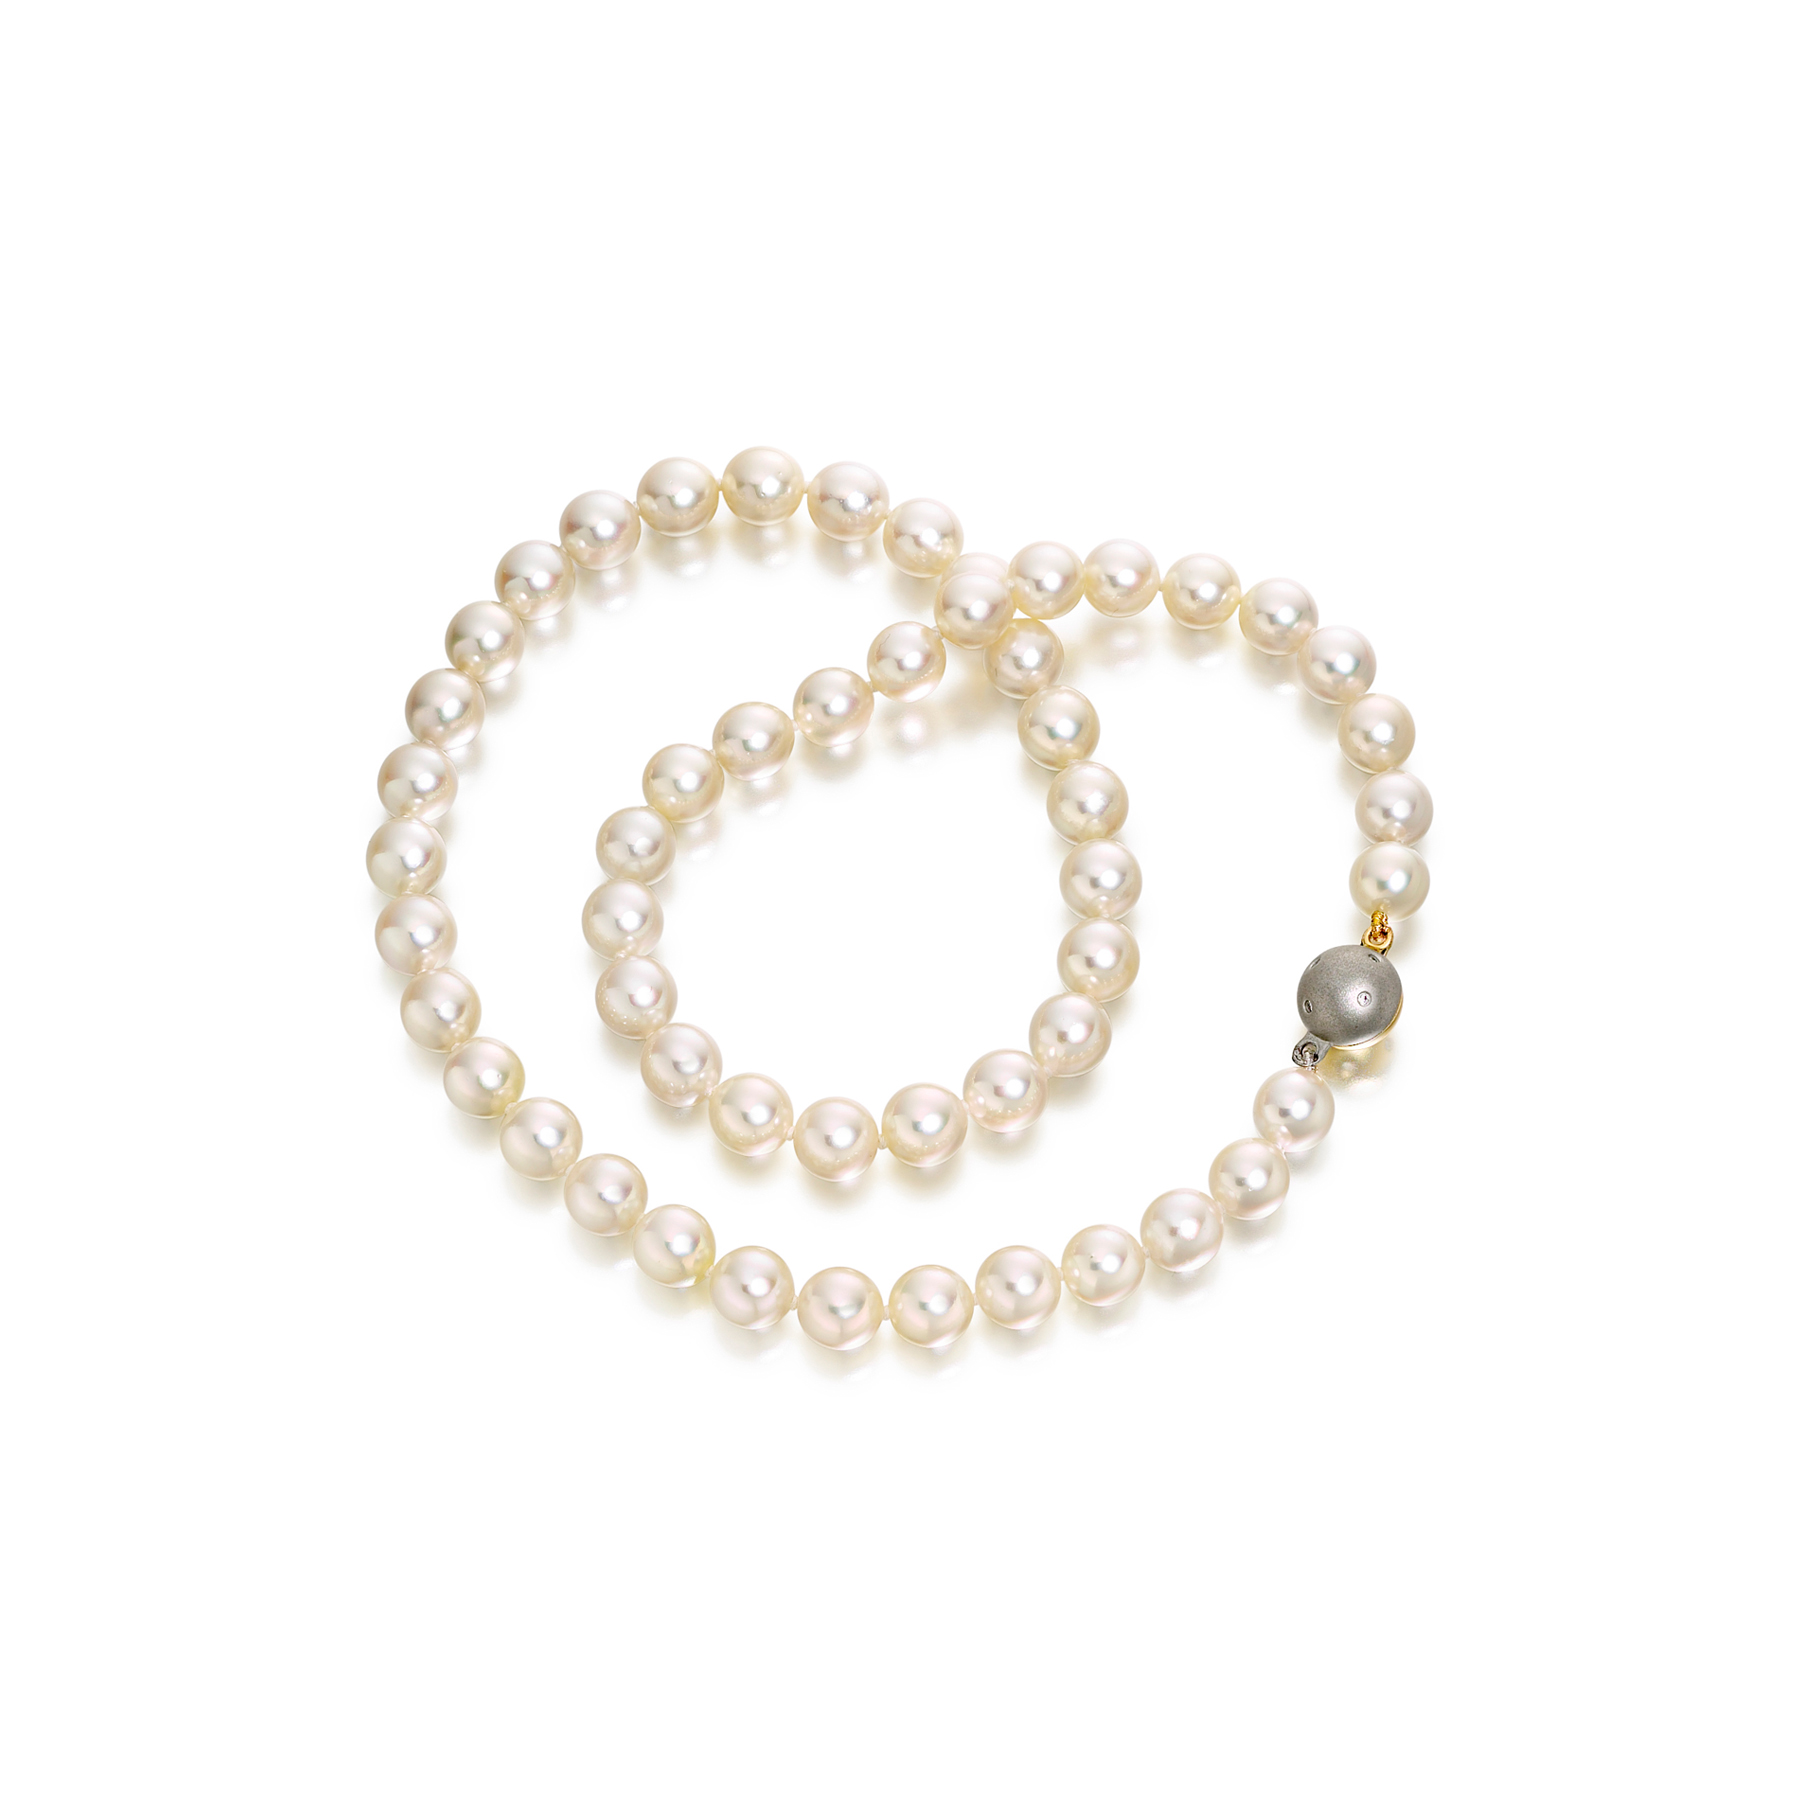 Single row pearl necklace